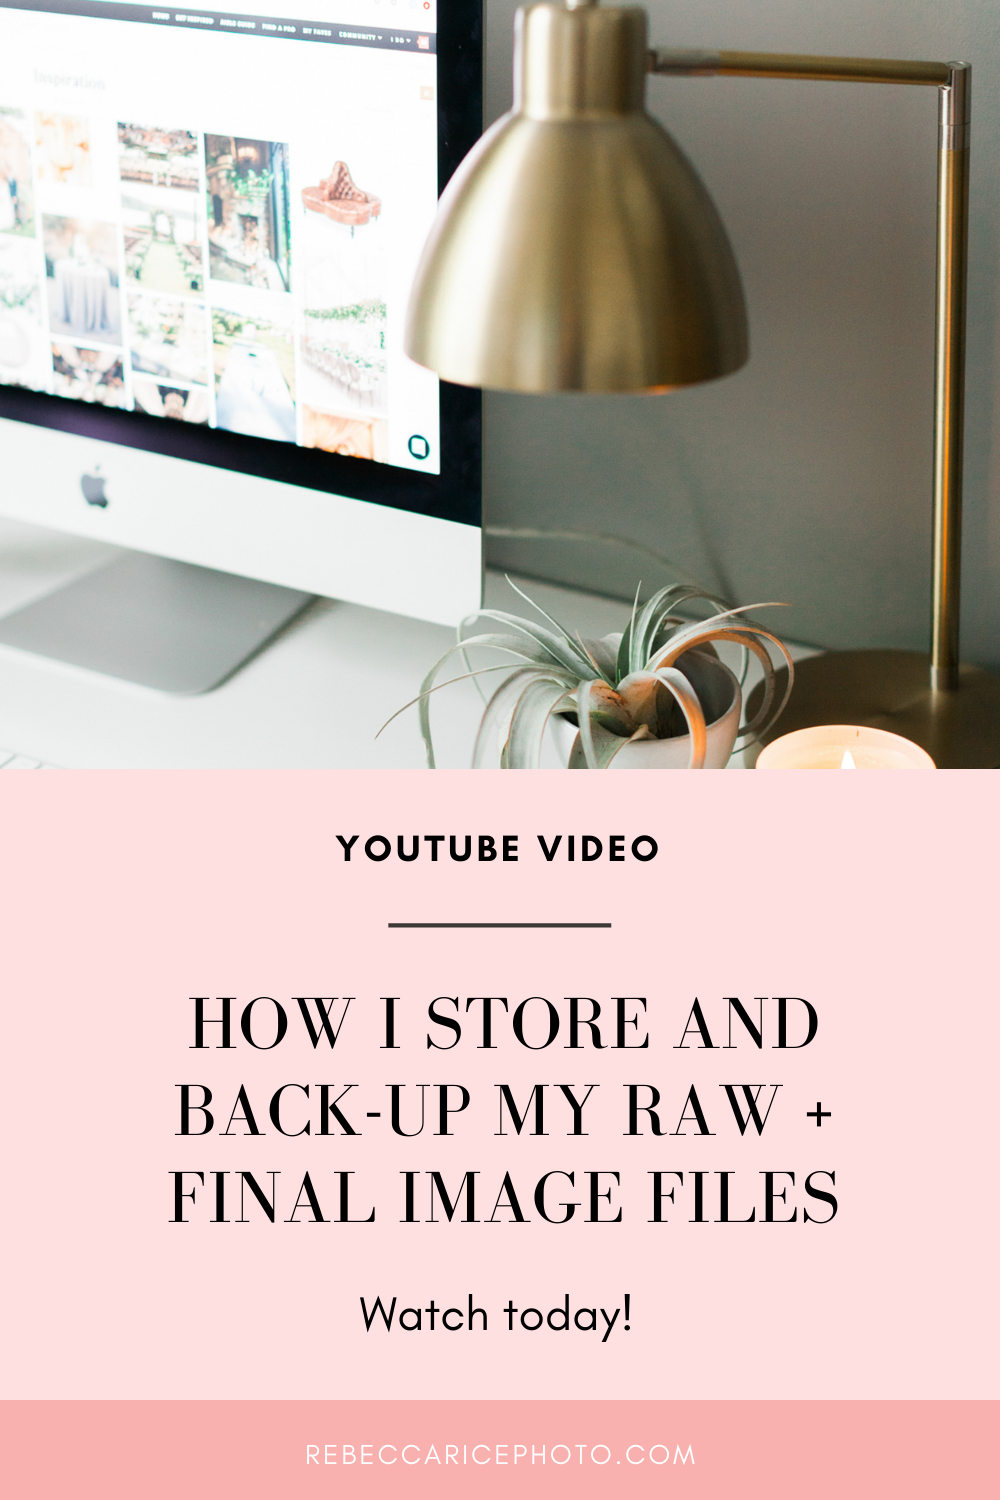 How I Store and Back-Up My RAW + Final Image Files